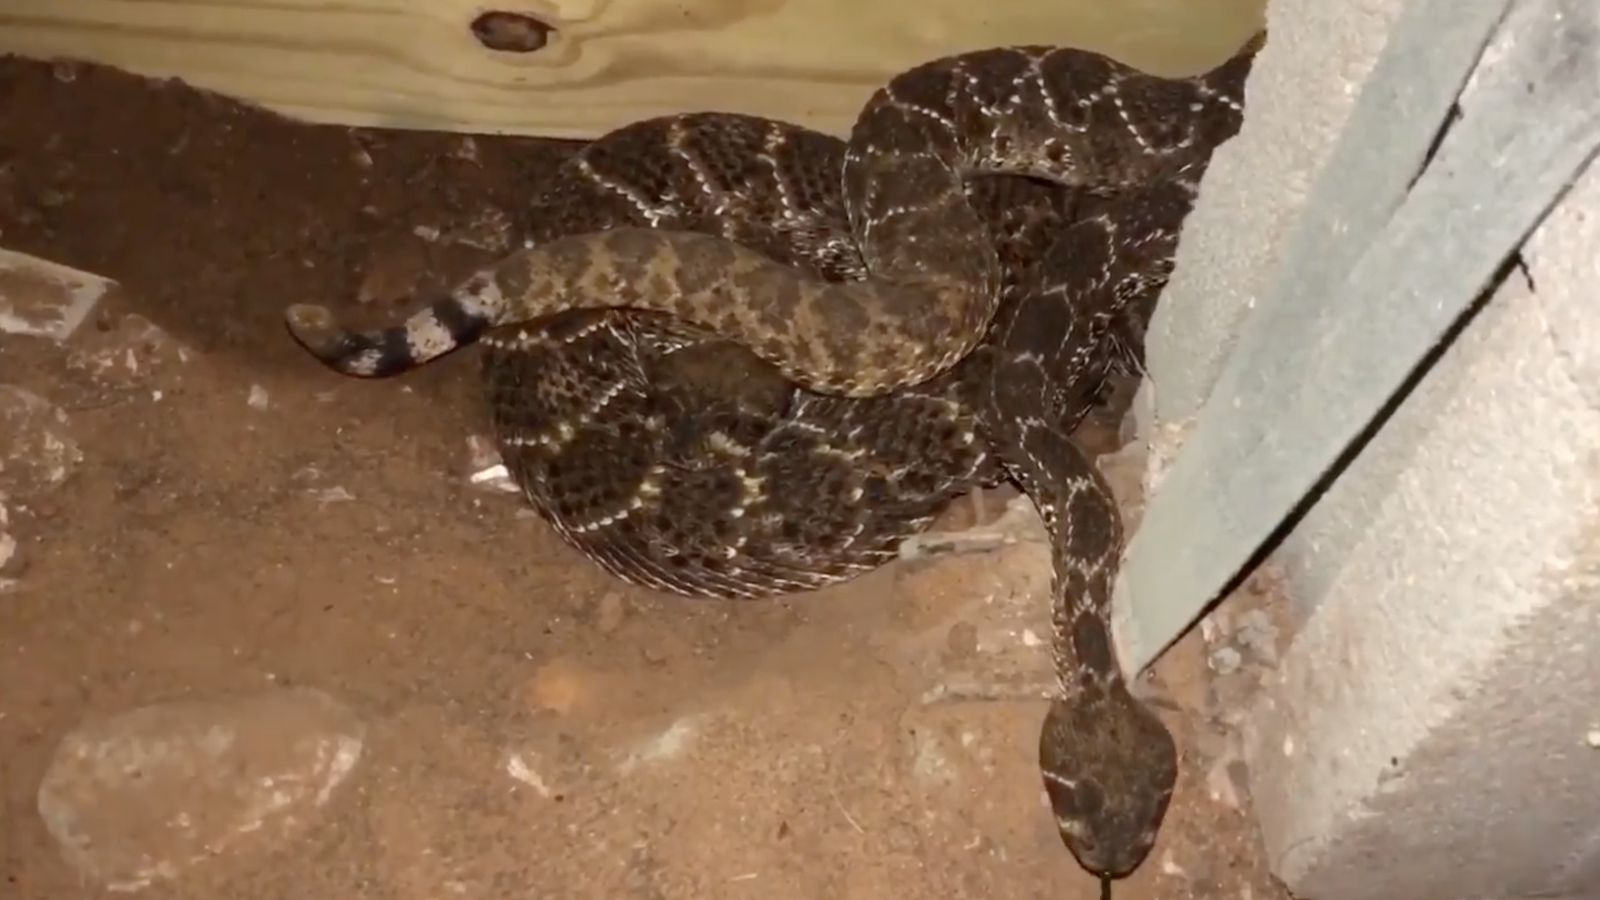 Snake Catcher Finds 45 Rattlesnakes at Texas Home